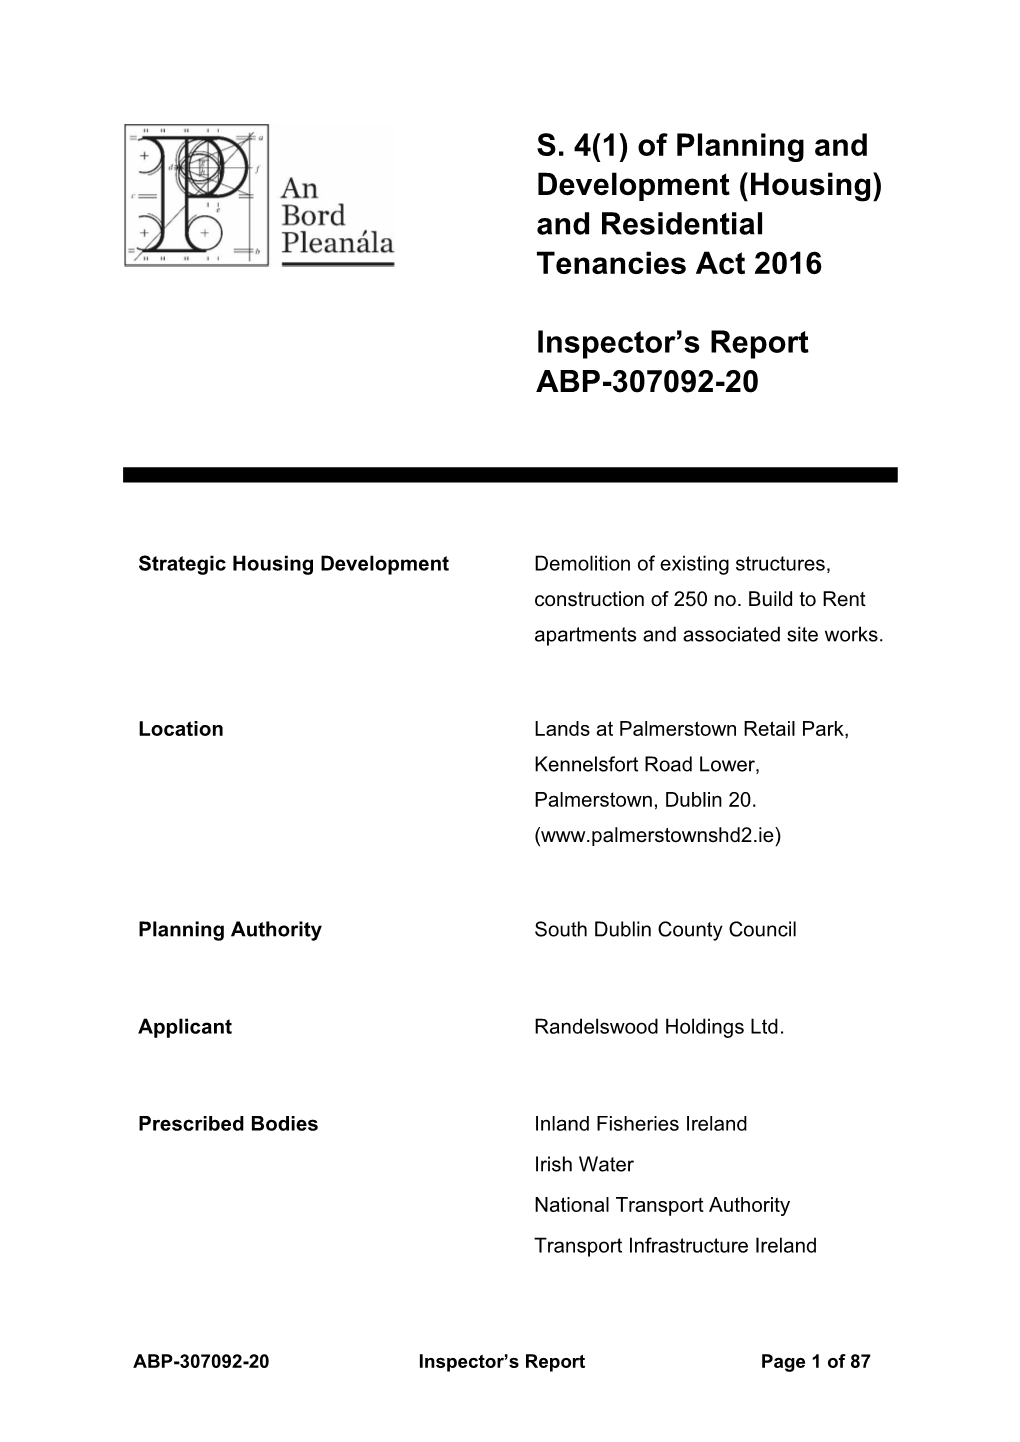 And Residential Tenancies Act 2016 Inspector's Report ABP-307092